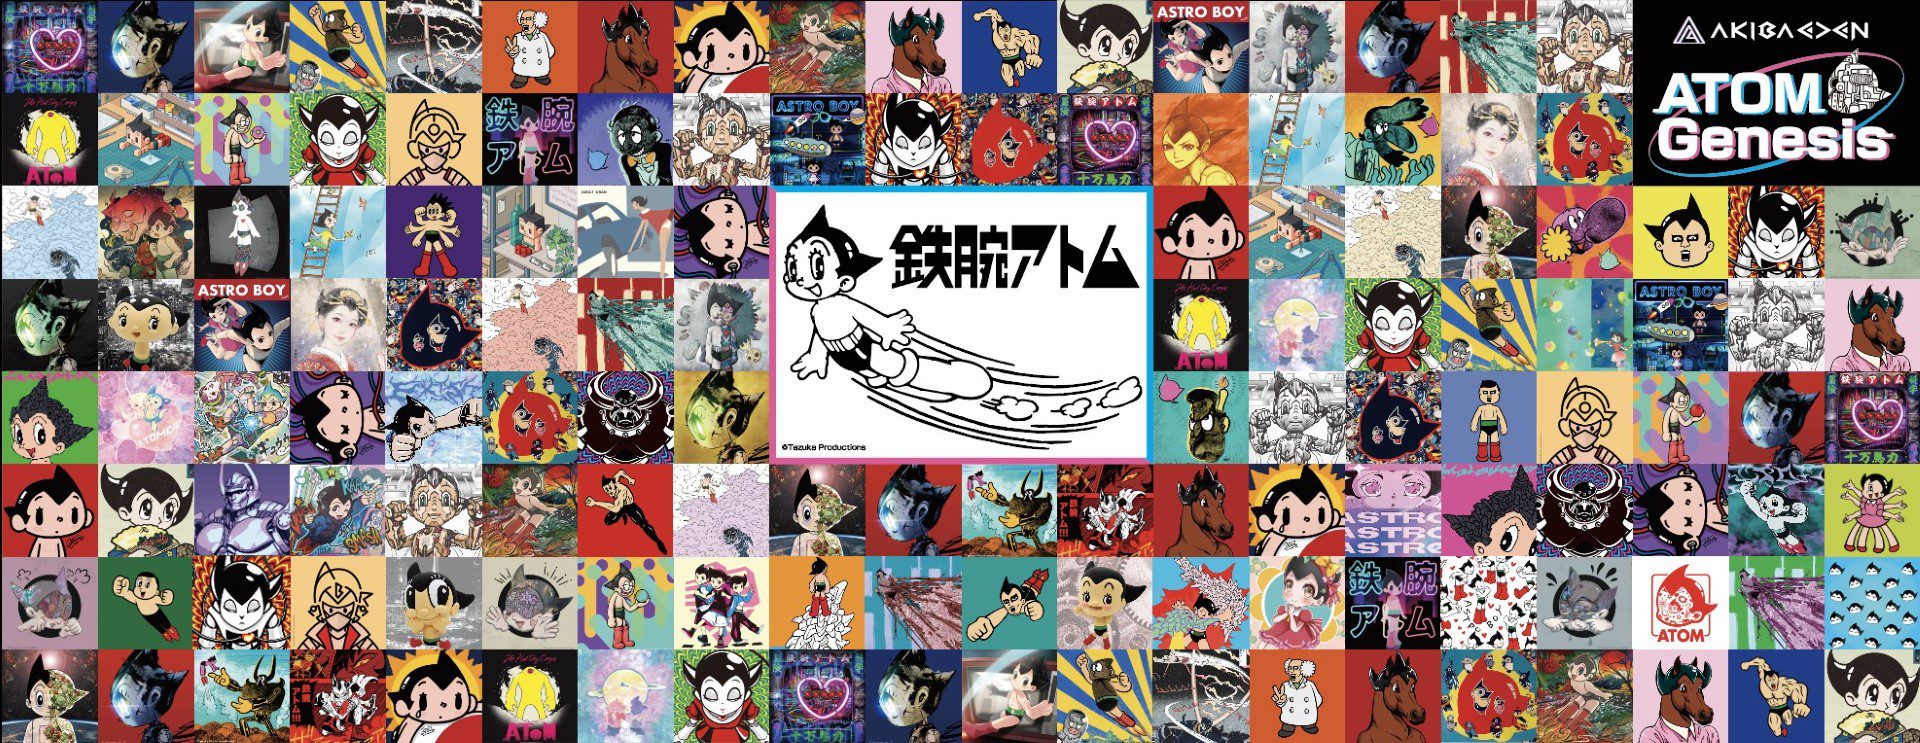 ATOM Genesis NFT Collection Launches on Astro Boy’s Birthday